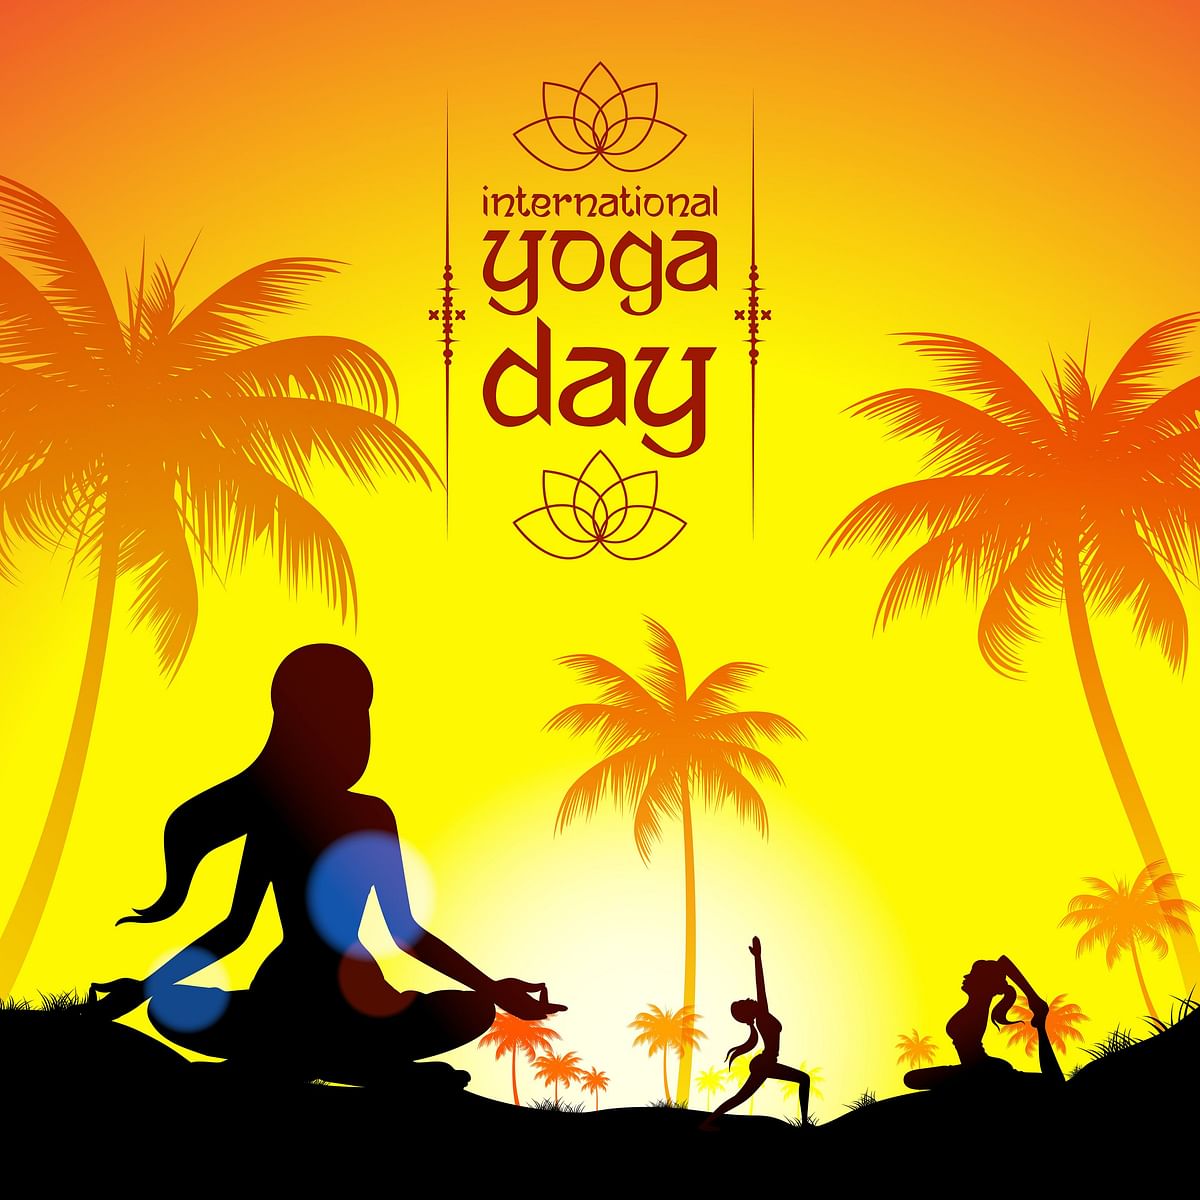 United Nations declared 21 June as International Day of Yoga in the year 2014